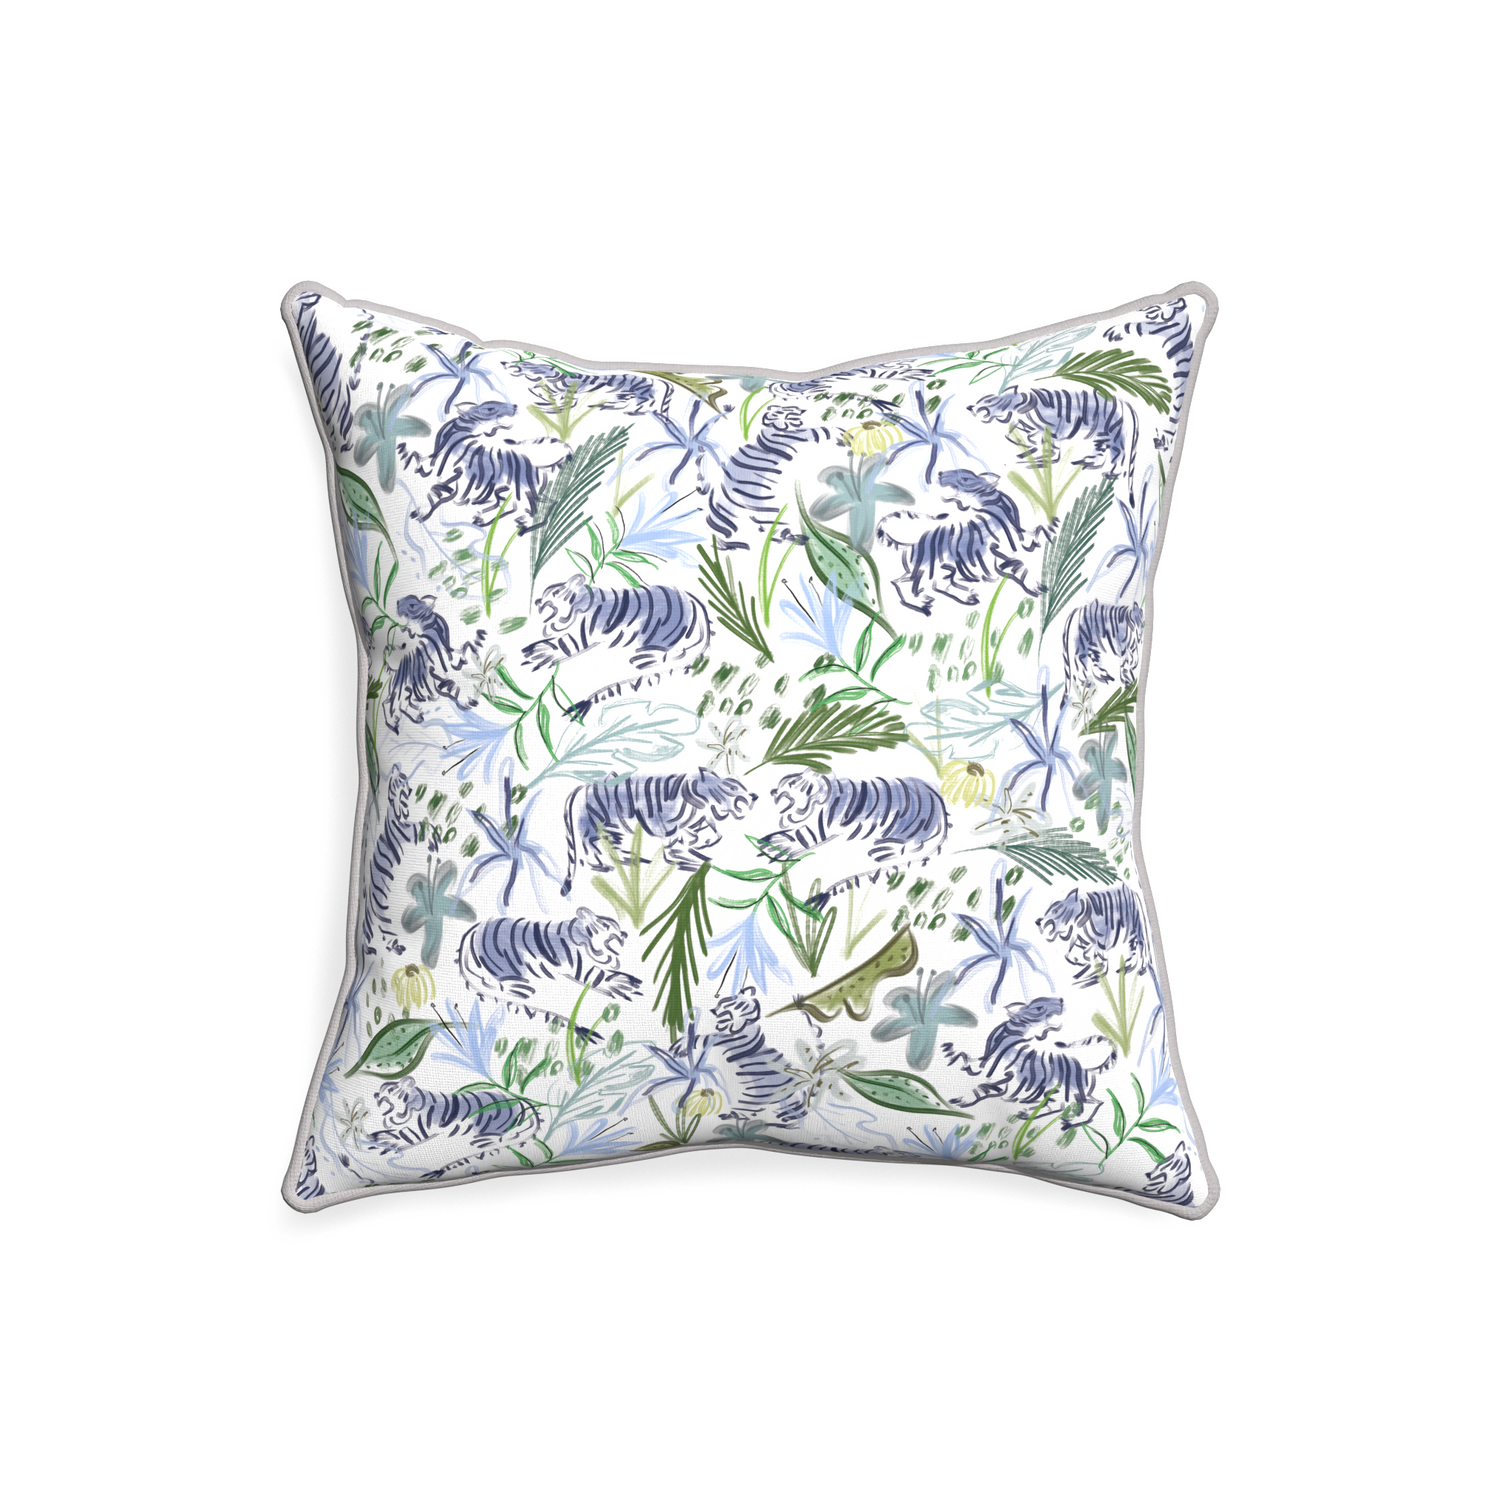 20-square frida green custom pillow with pebble piping on white background